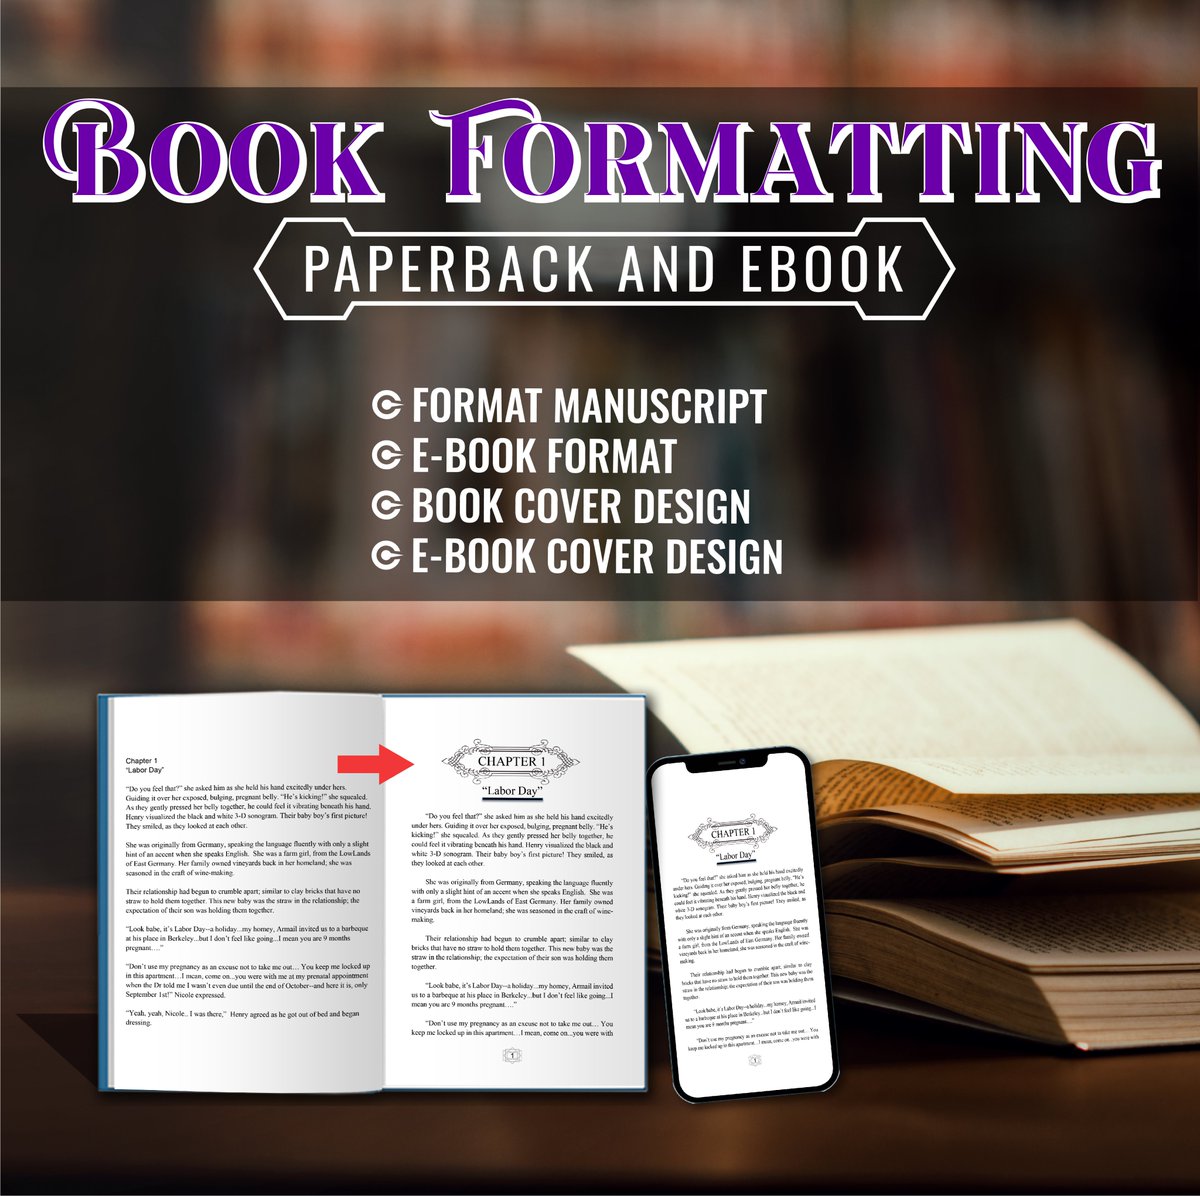 As an expert in manually converting eBooks for all major platforms, I am able to convert eBooks to Kindle format for Amazon, ePub format for Apple, and Ingram Spark format for Ingram.
Hire me: fiverr.com/share/LNpv3L

#bookformat #kdpbookformat #kindleformatting #amazonkdp